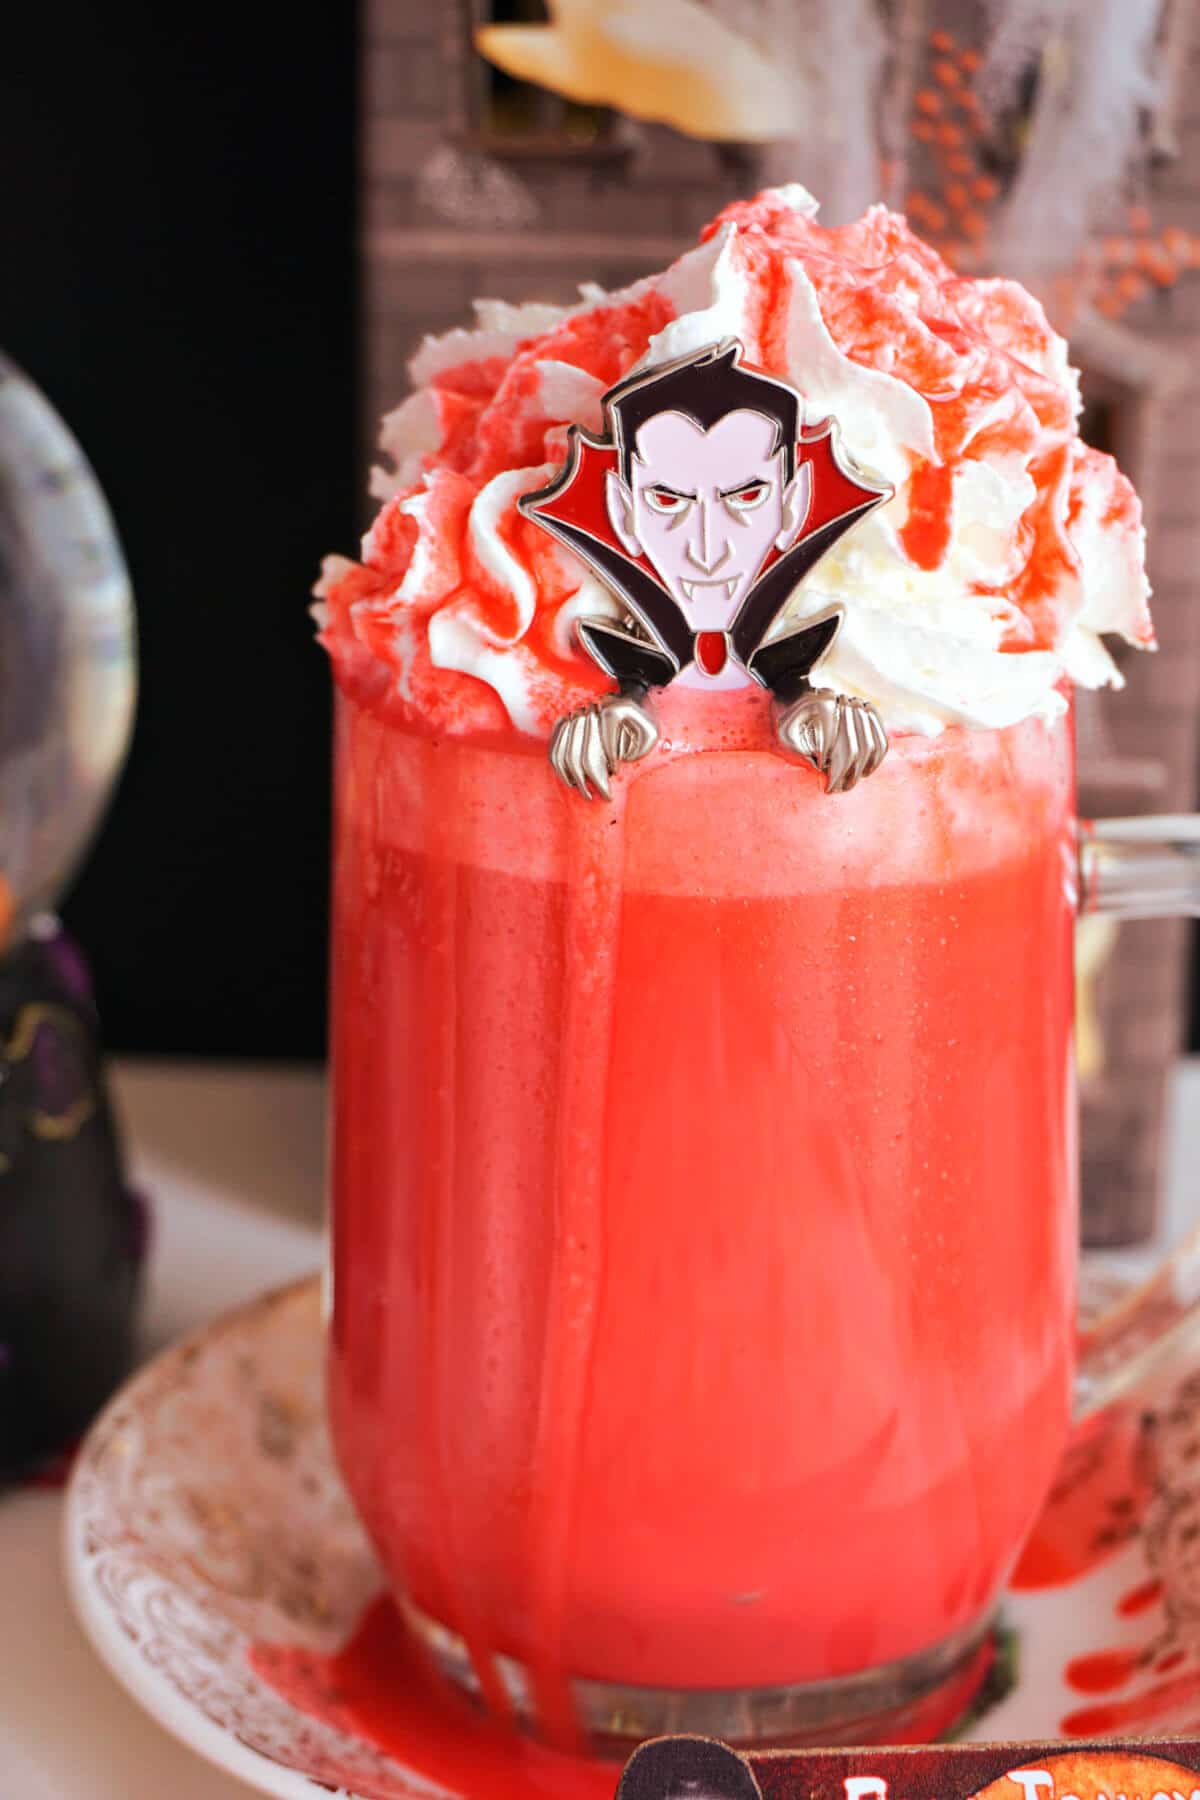 A glass of red hot chocolate with a dracula spoon in it.